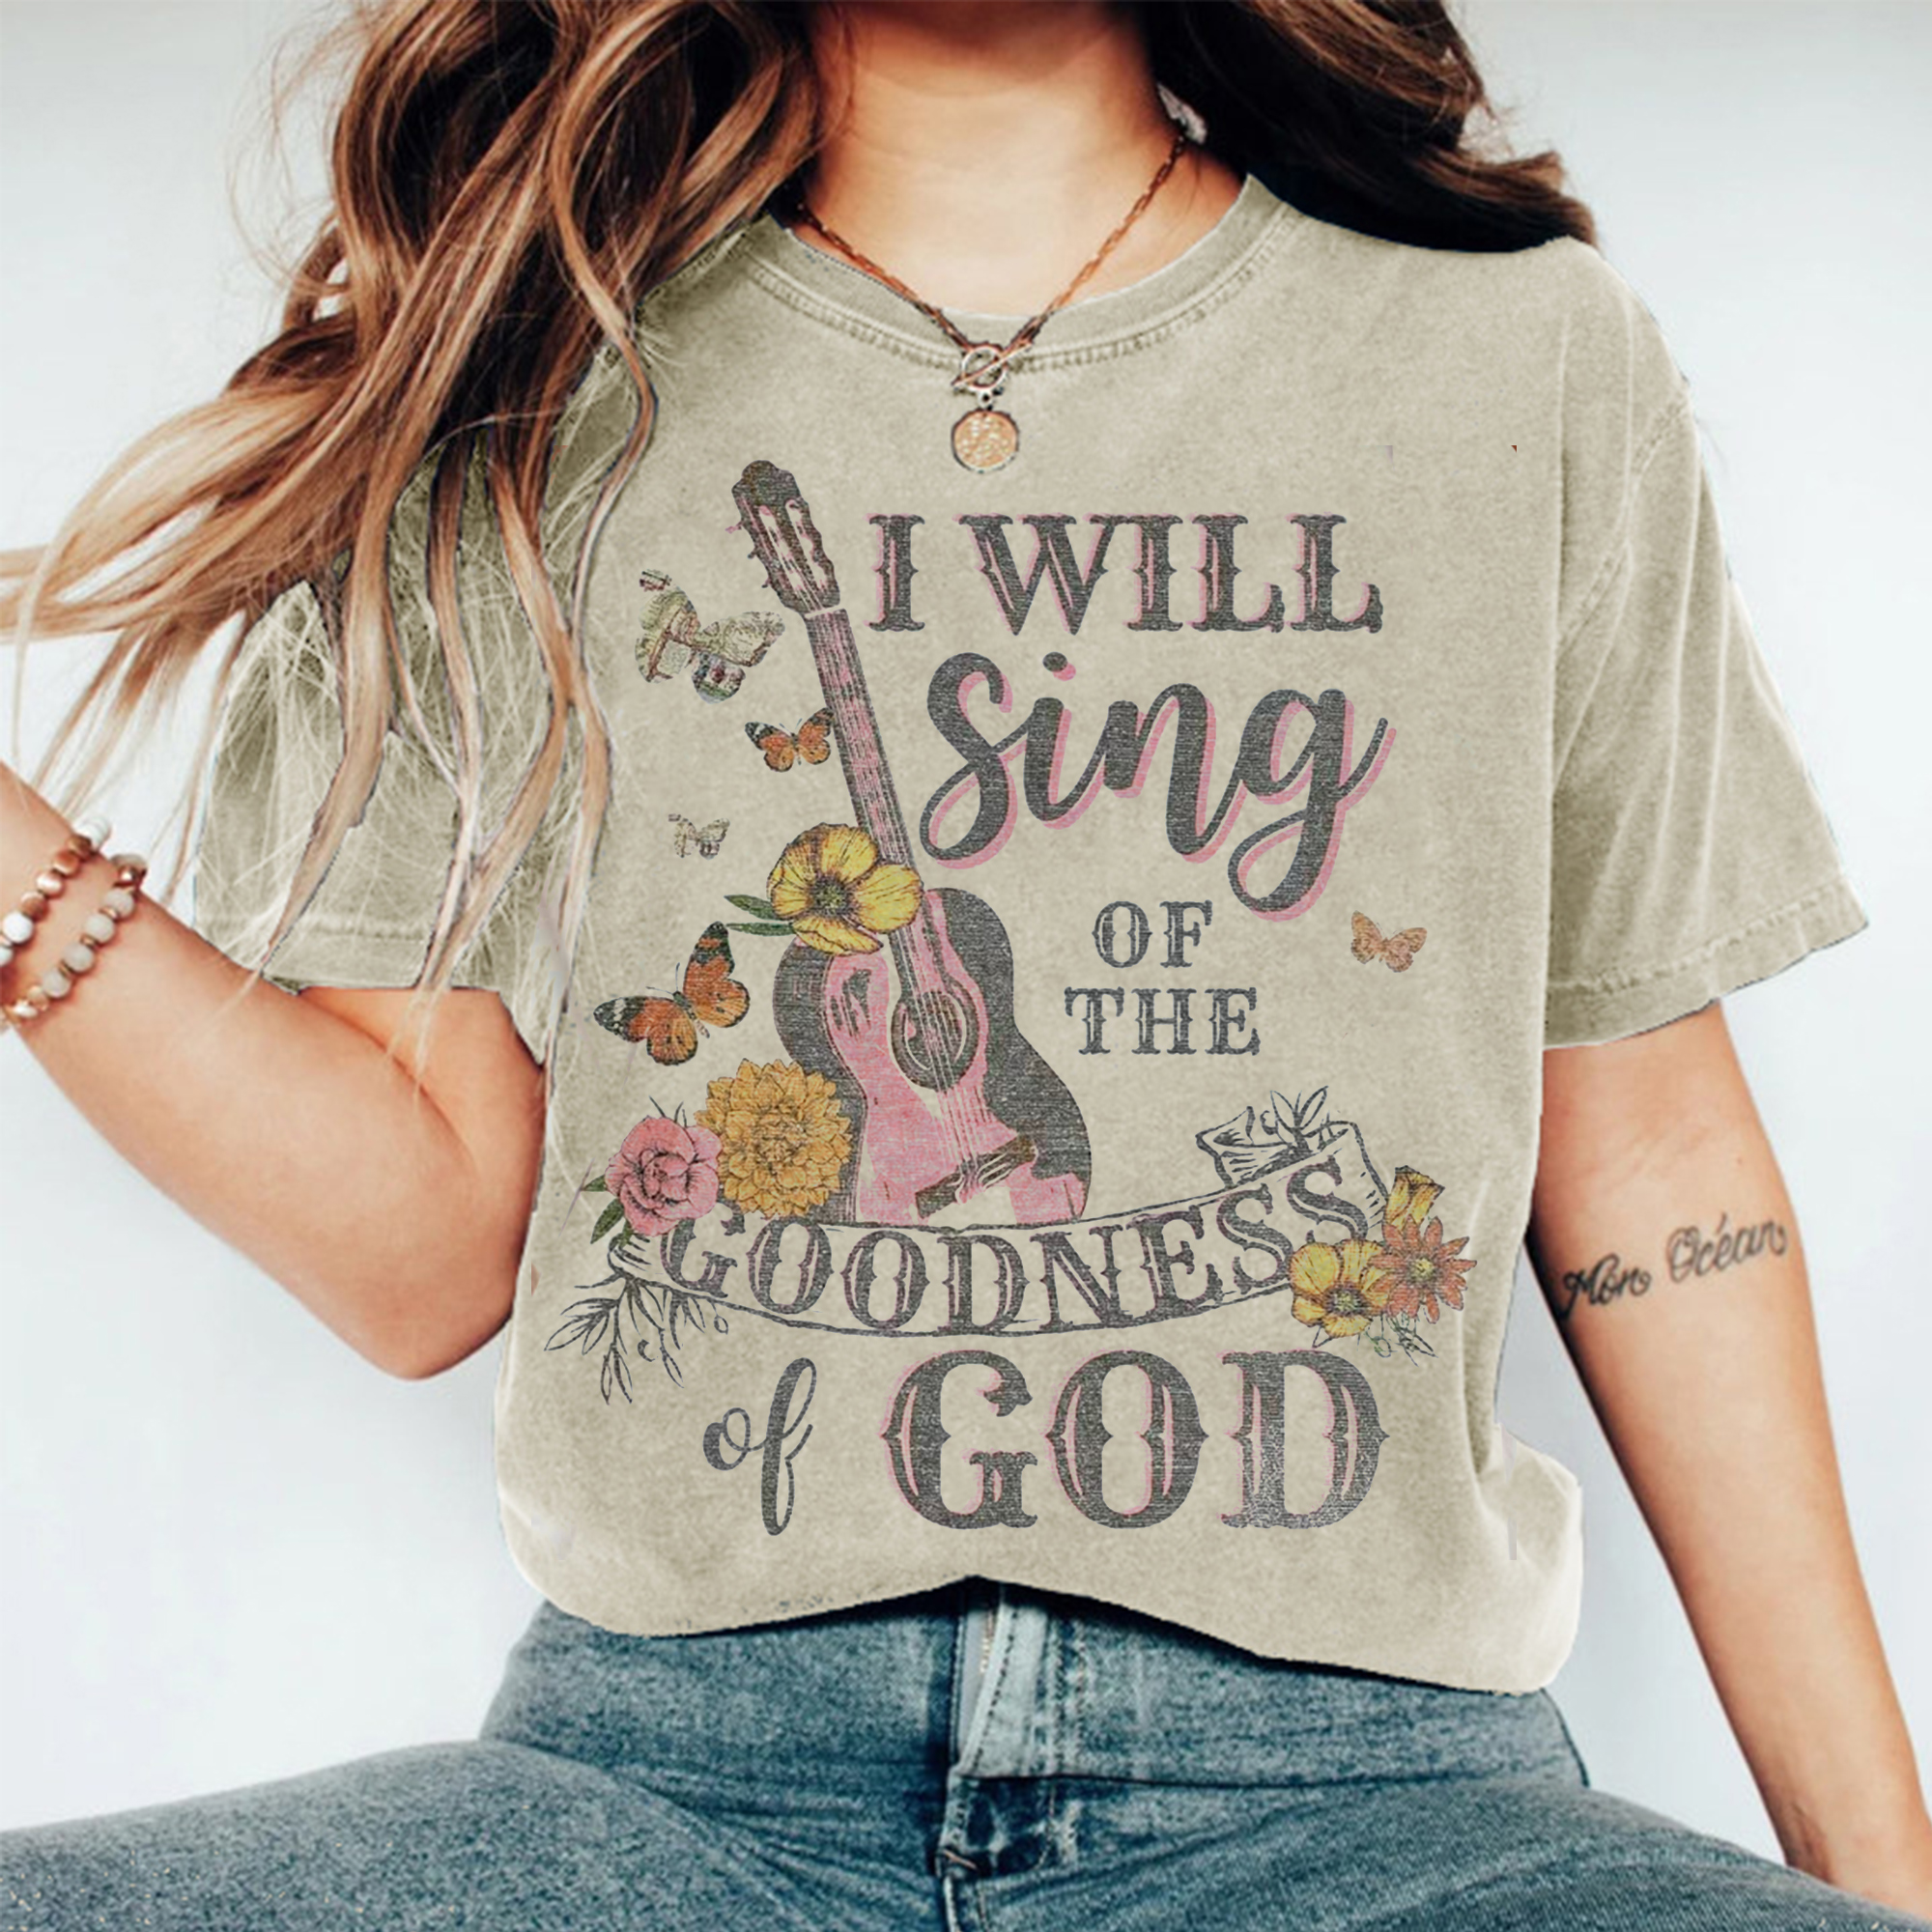 i will sing of the goodness of god T-Shirt